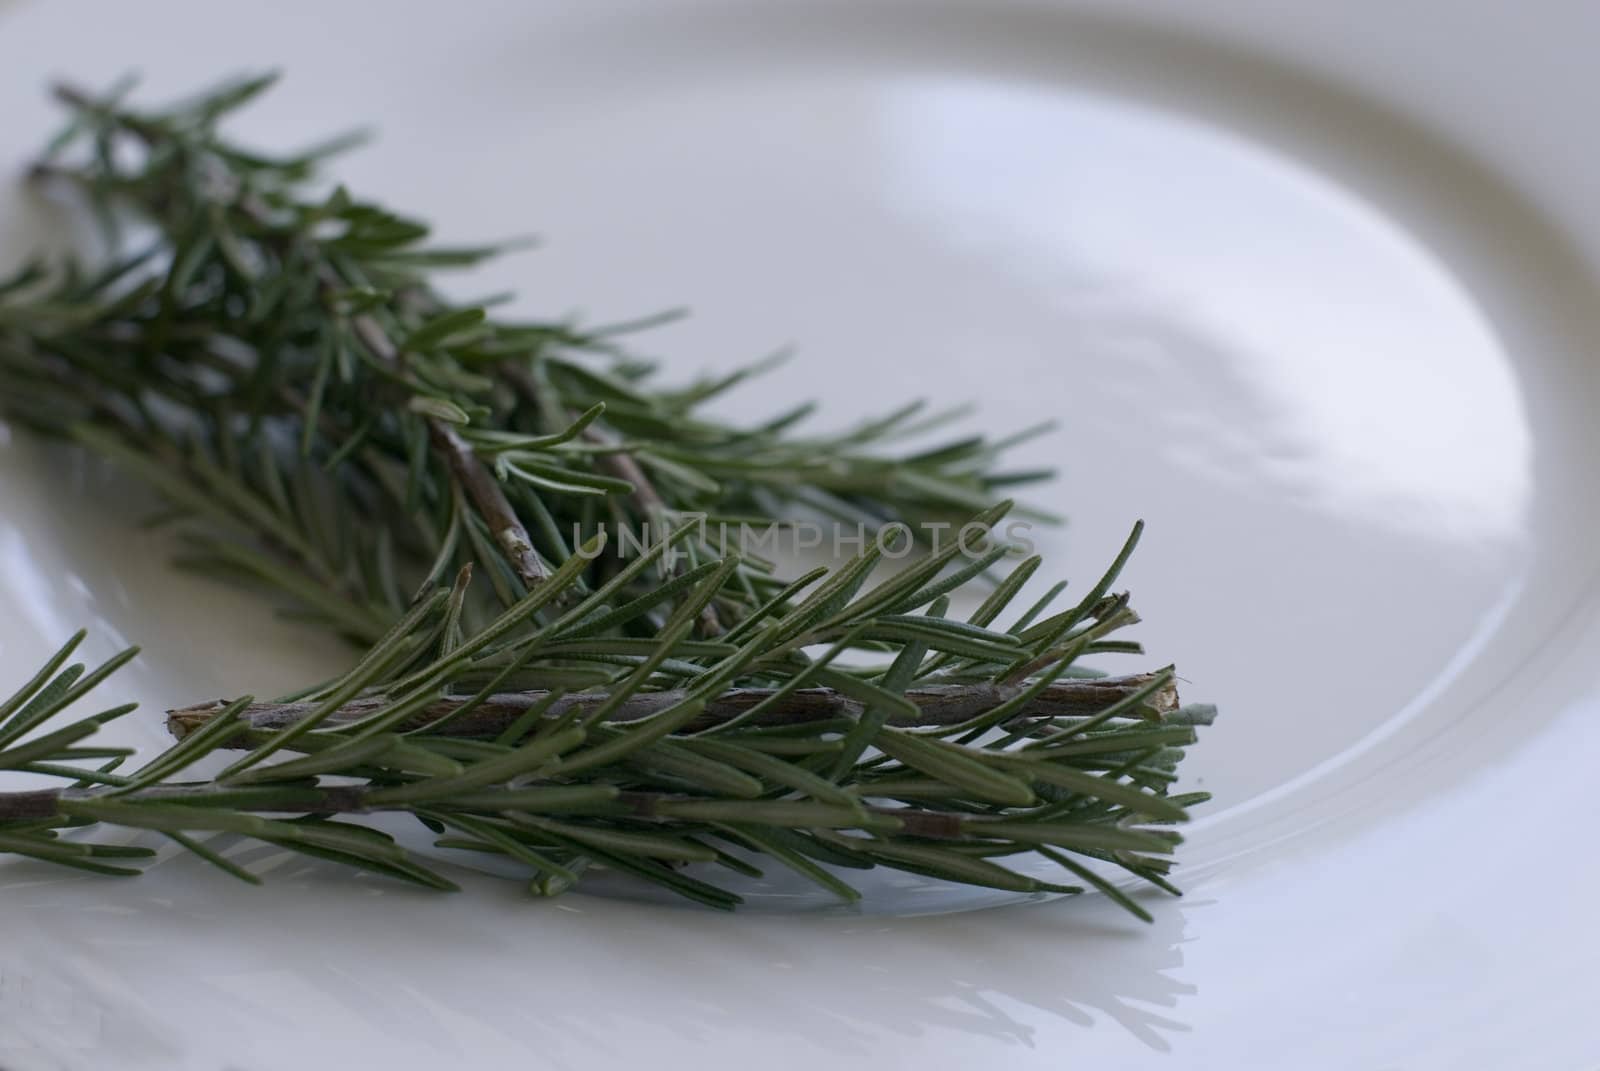 Rosemary (Rosmarinus officinalis), a perennial herb with fragrant evergreen leaves. It is native to the Mediterranean region.